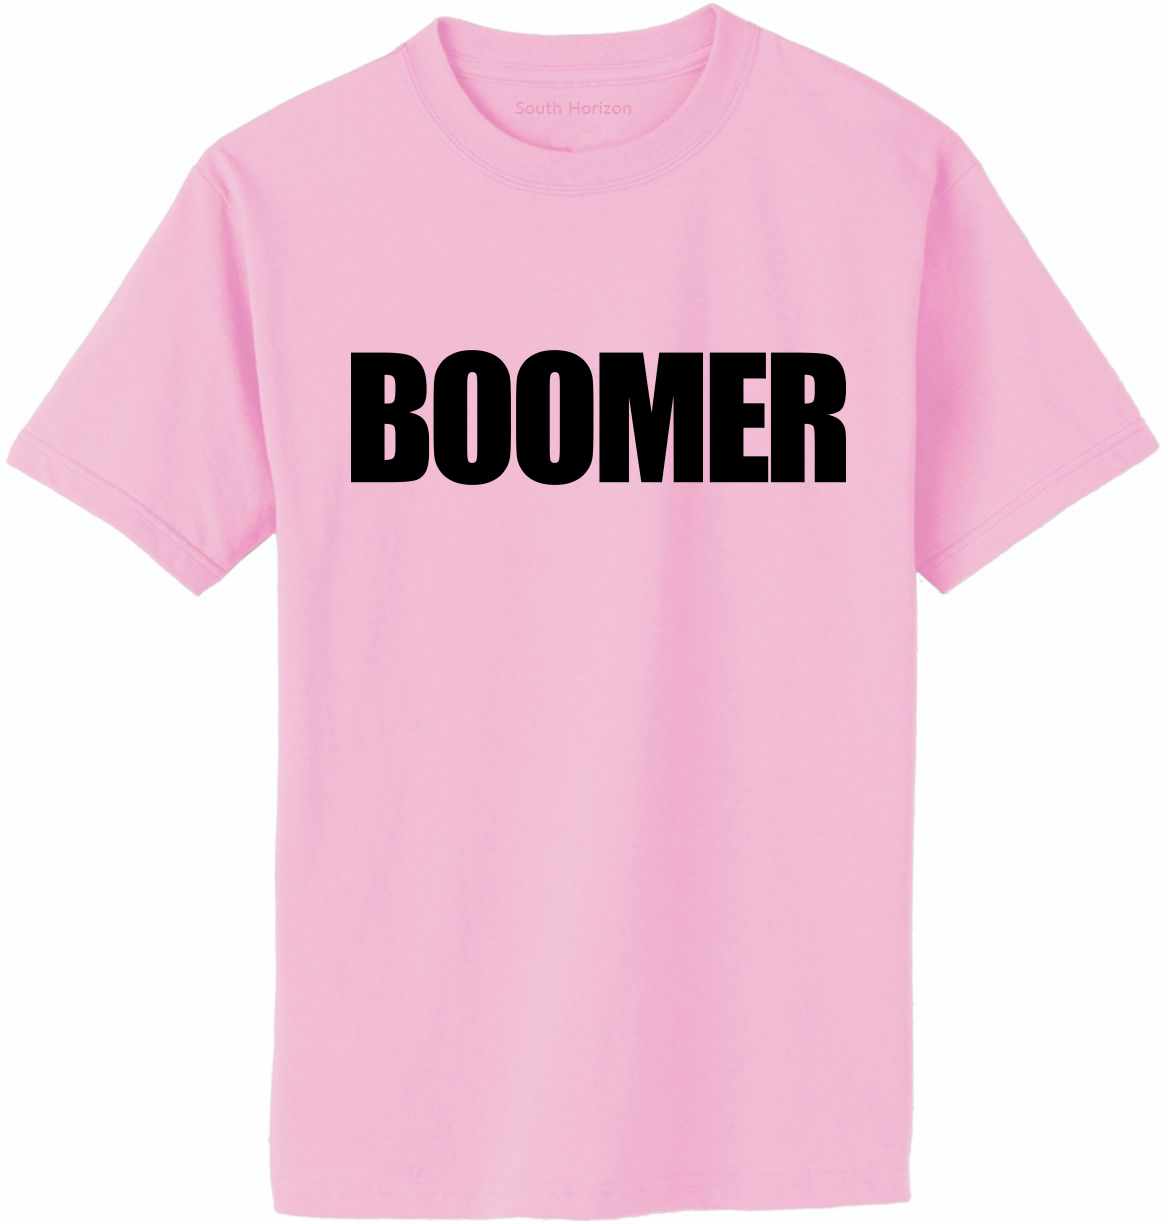 BOOMER on Adult T-Shirt (#1239-1)